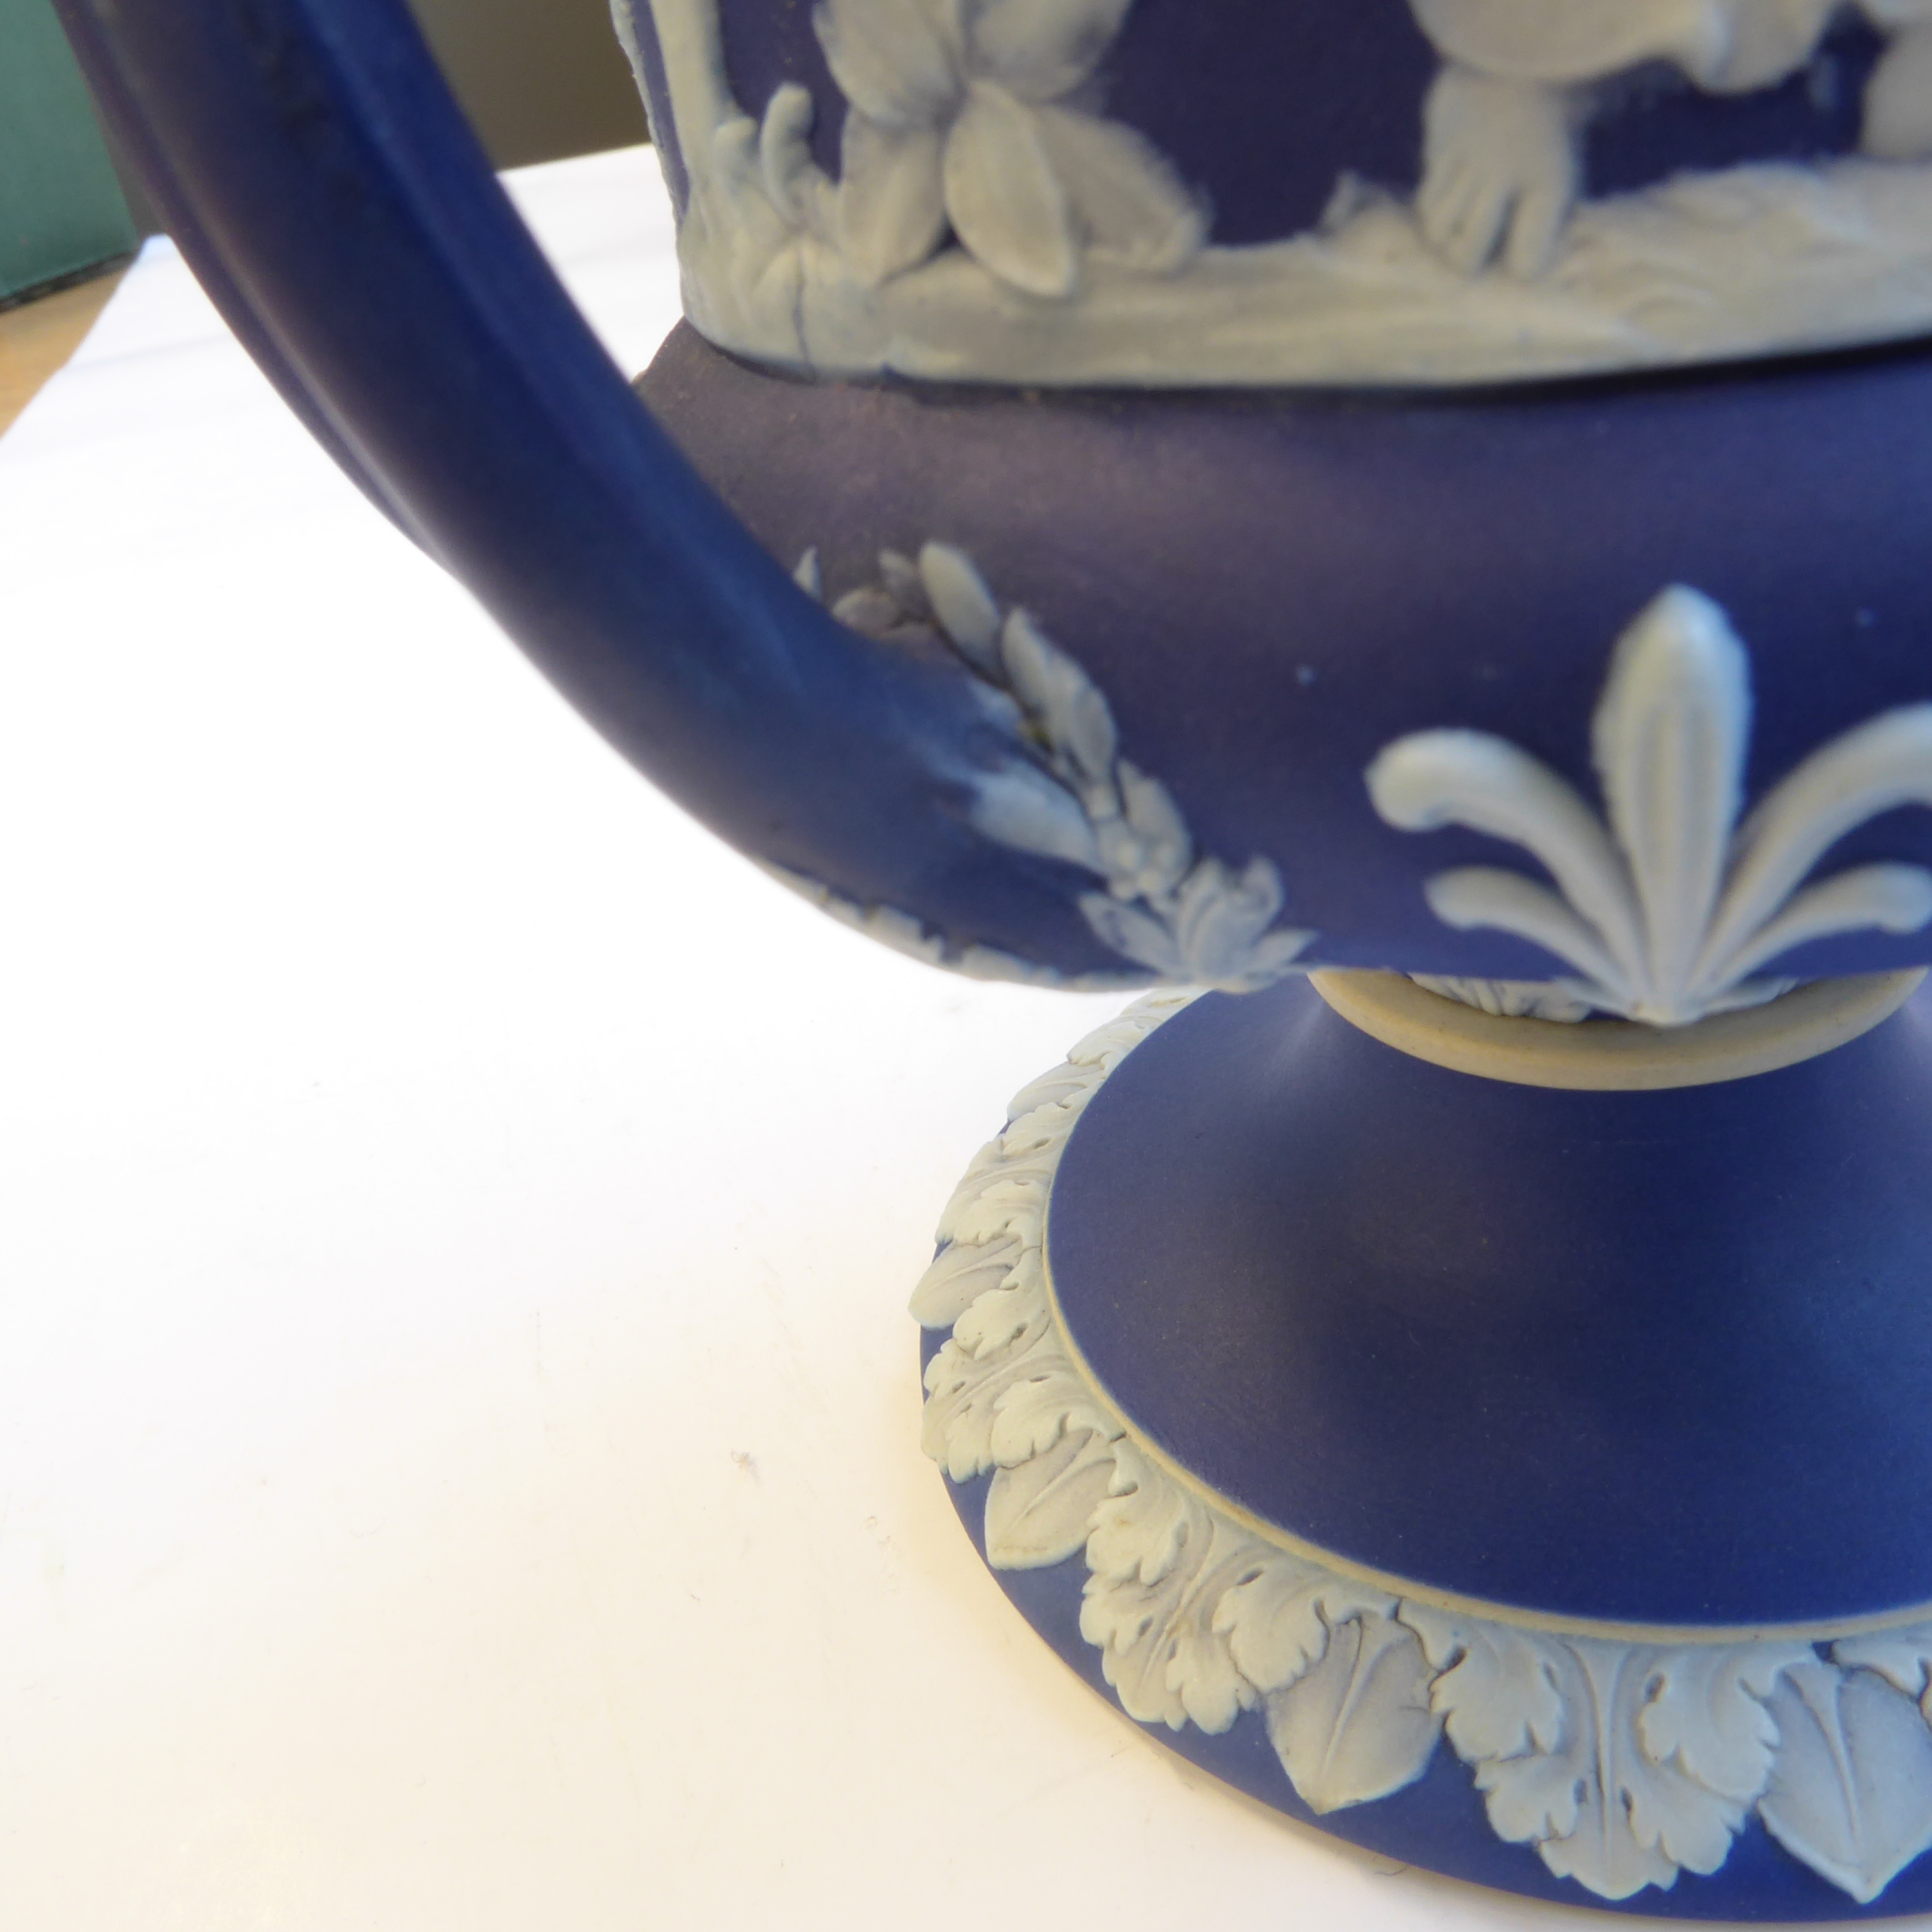 Various 19th / early 20th century Wedgwood Jasperware in typical neo-classical style with applied - Image 20 of 24